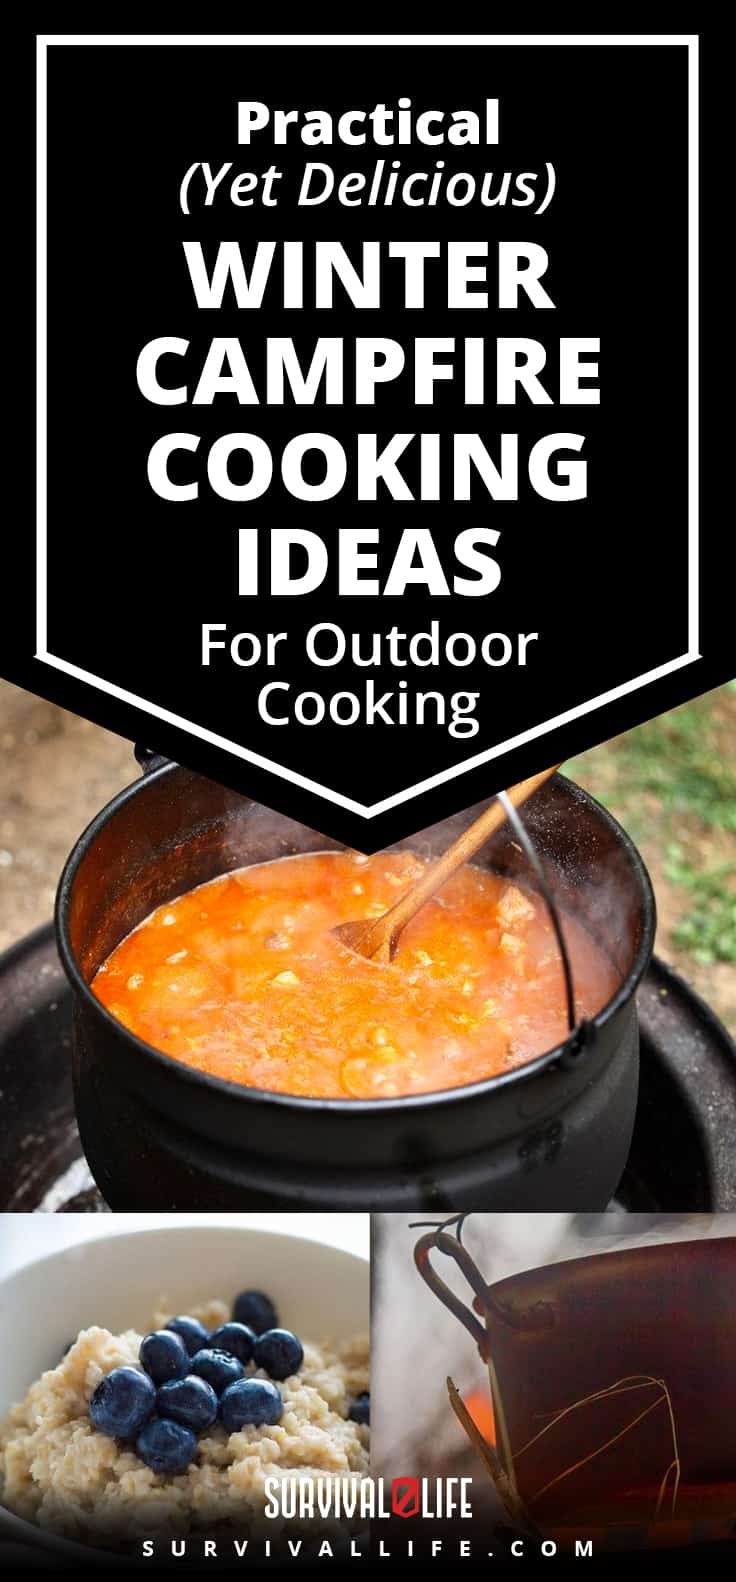 Placard | Practical (Yet Delicious) Winter Campfire Cooking Ideas For Outdoor Cooking